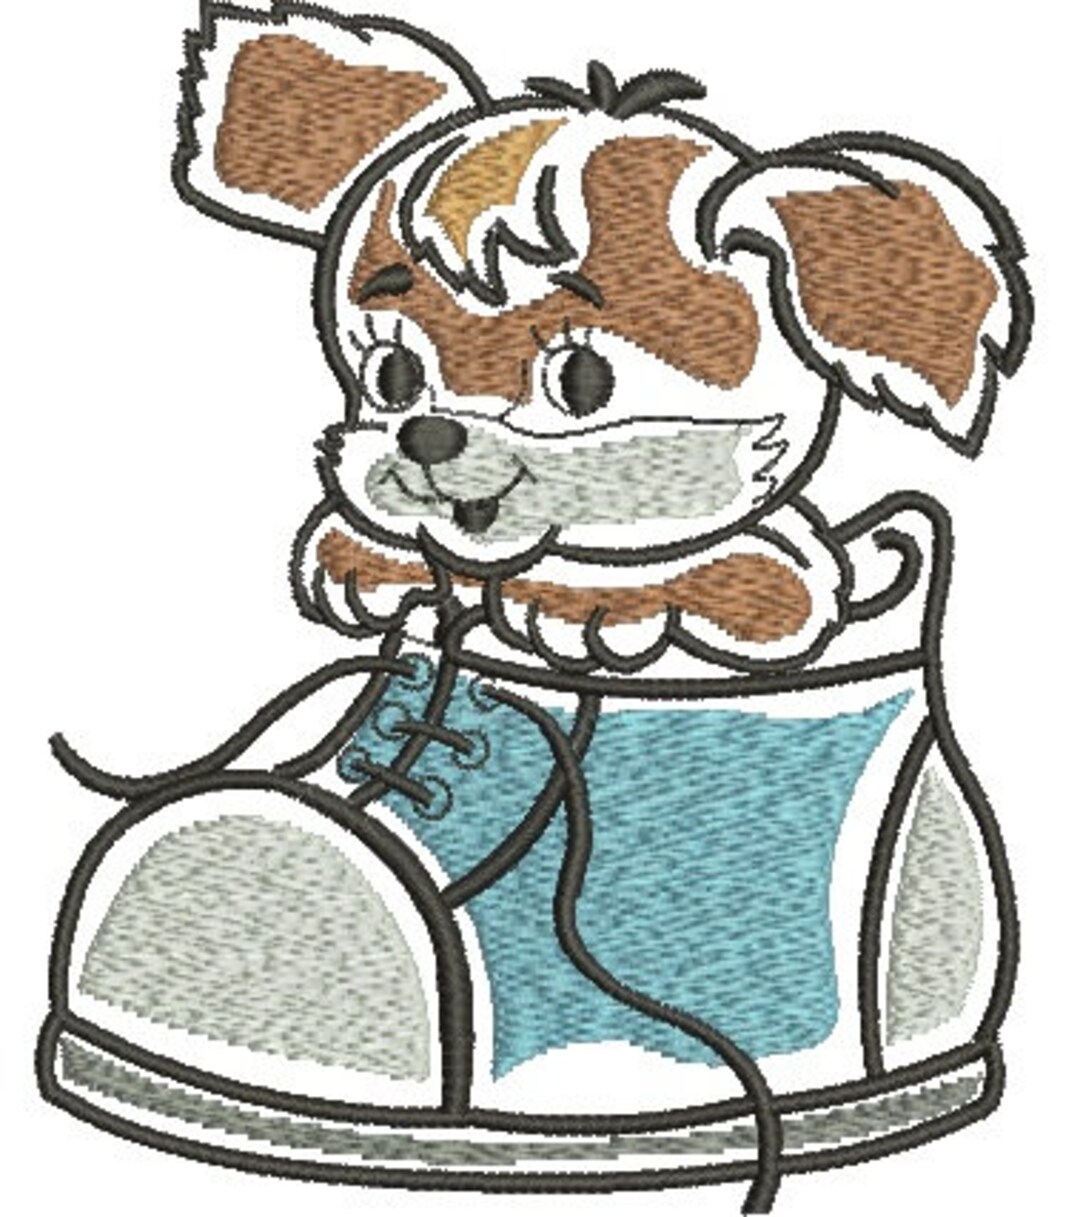 Little Dog Baby Embroidery Design Pattern File Machine - Etsy